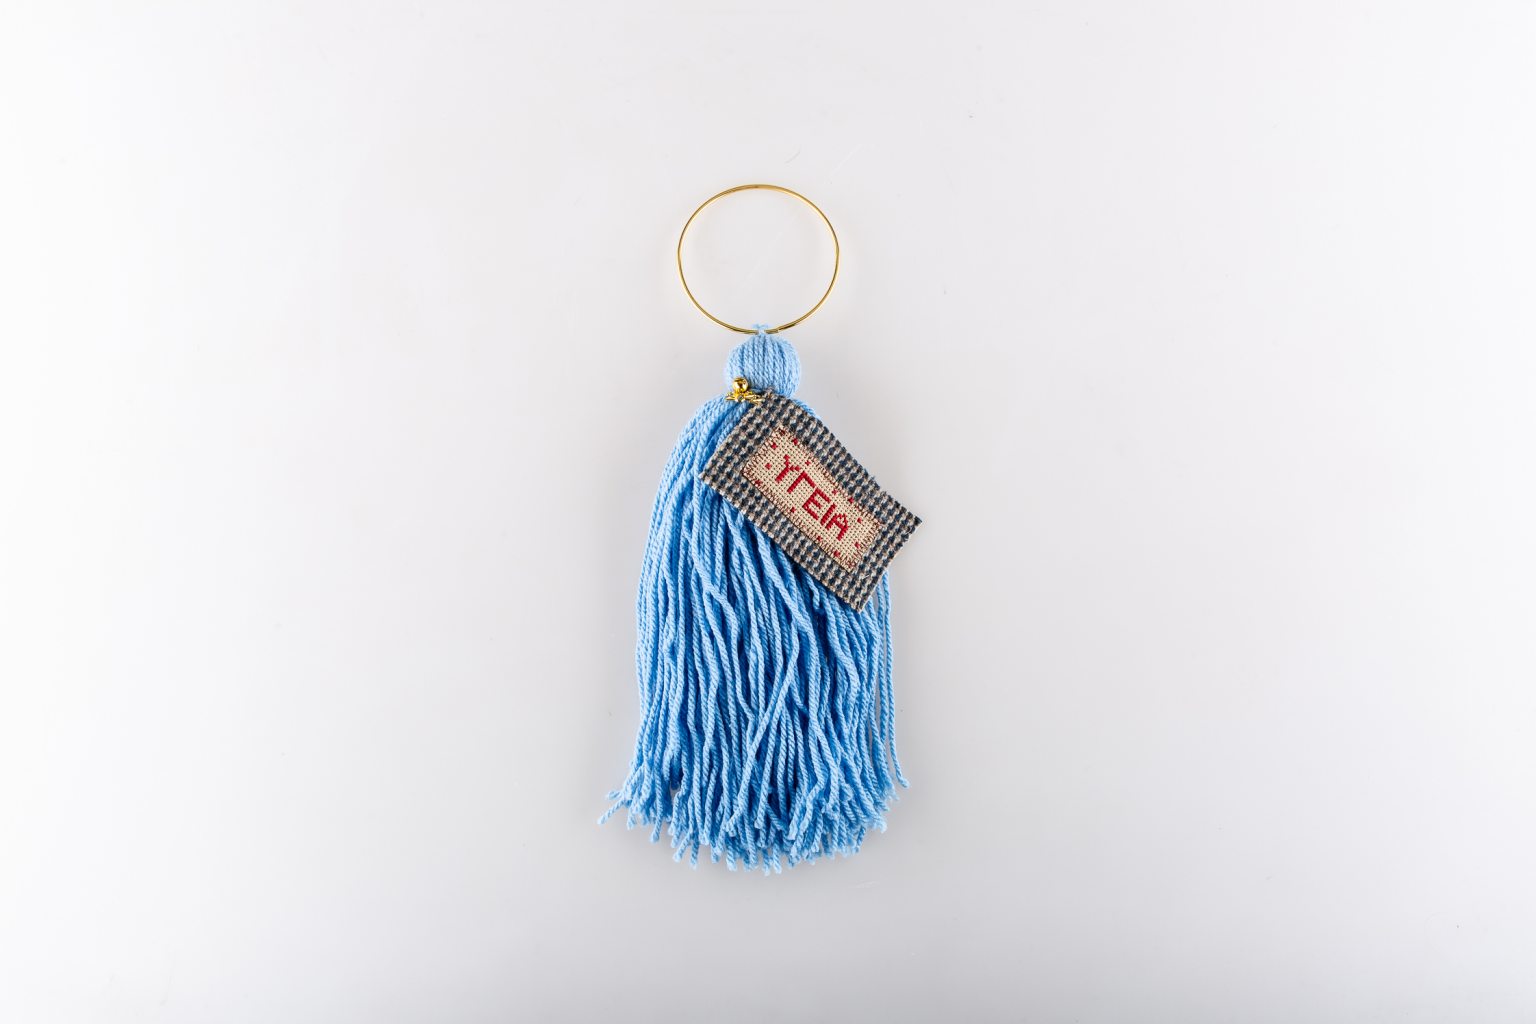 Hand-embroidered lucky-charm "Yγεία"